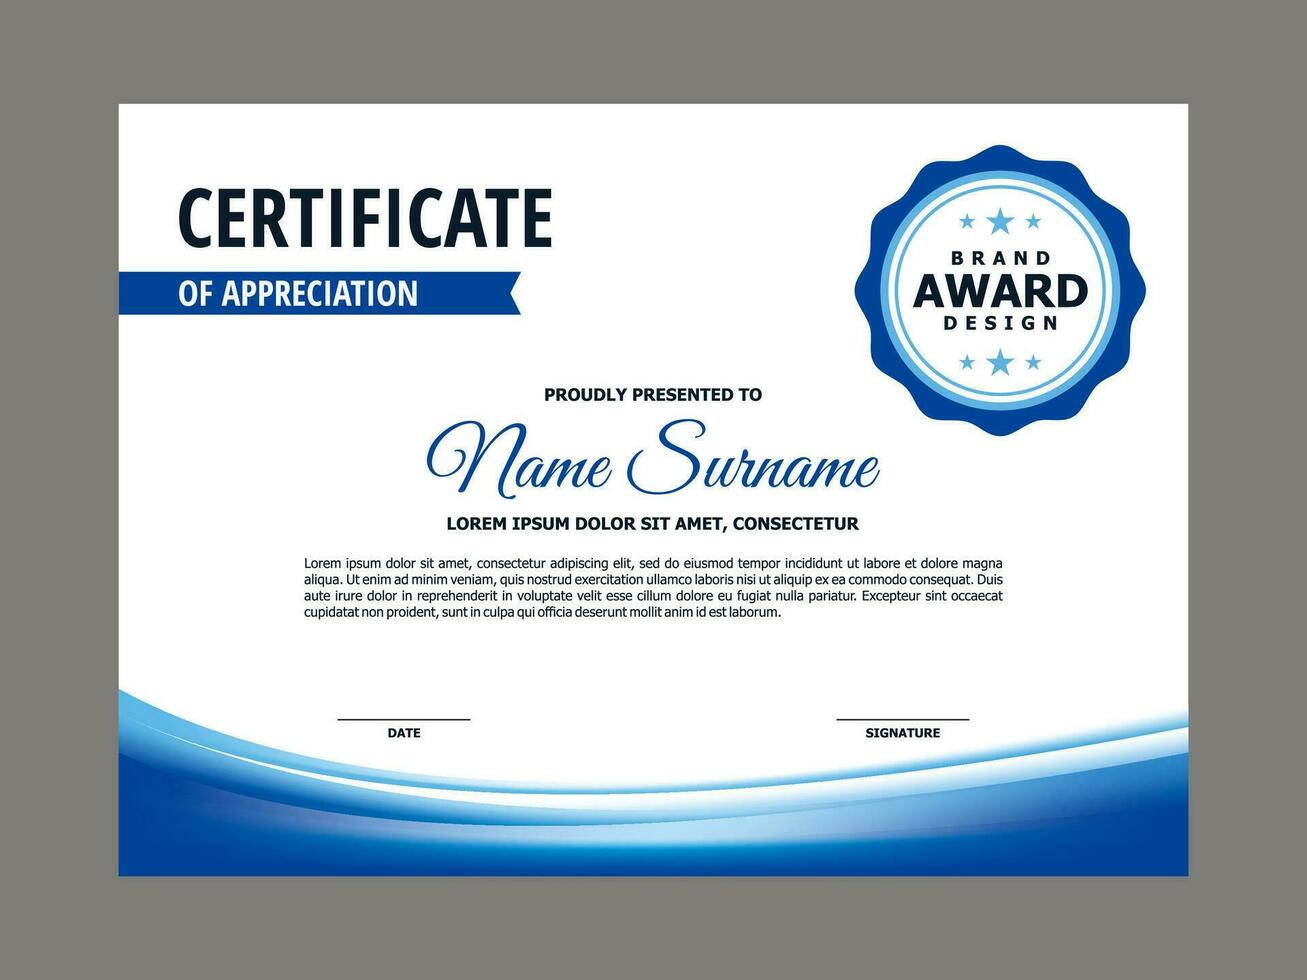 Certificate Template with Blue Flowing Element Design vector